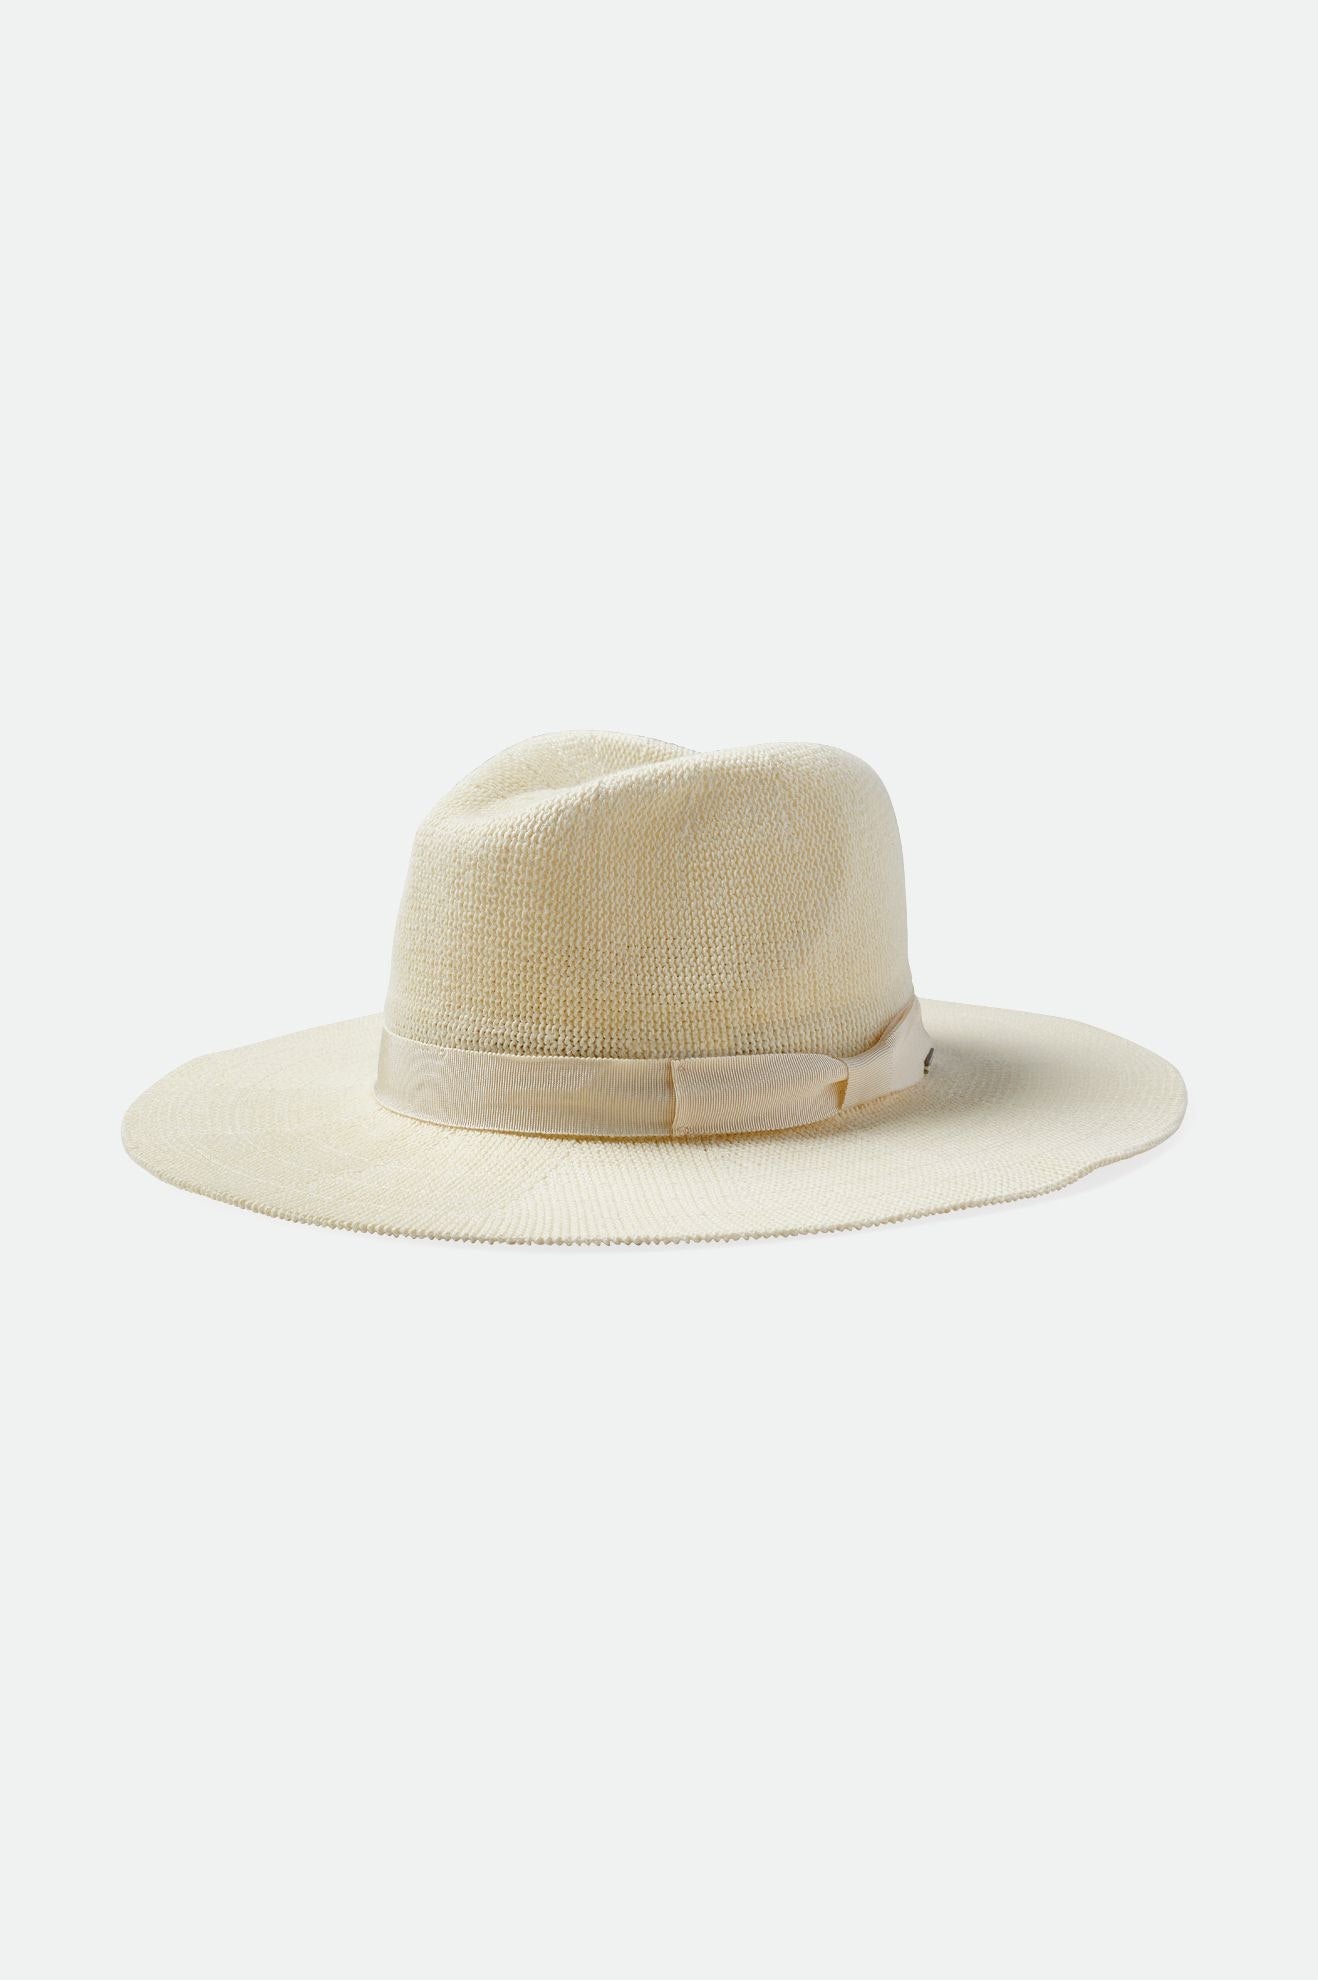 Brixton Women's Lyons Straw Packable Knit Hat - Natural | Profile